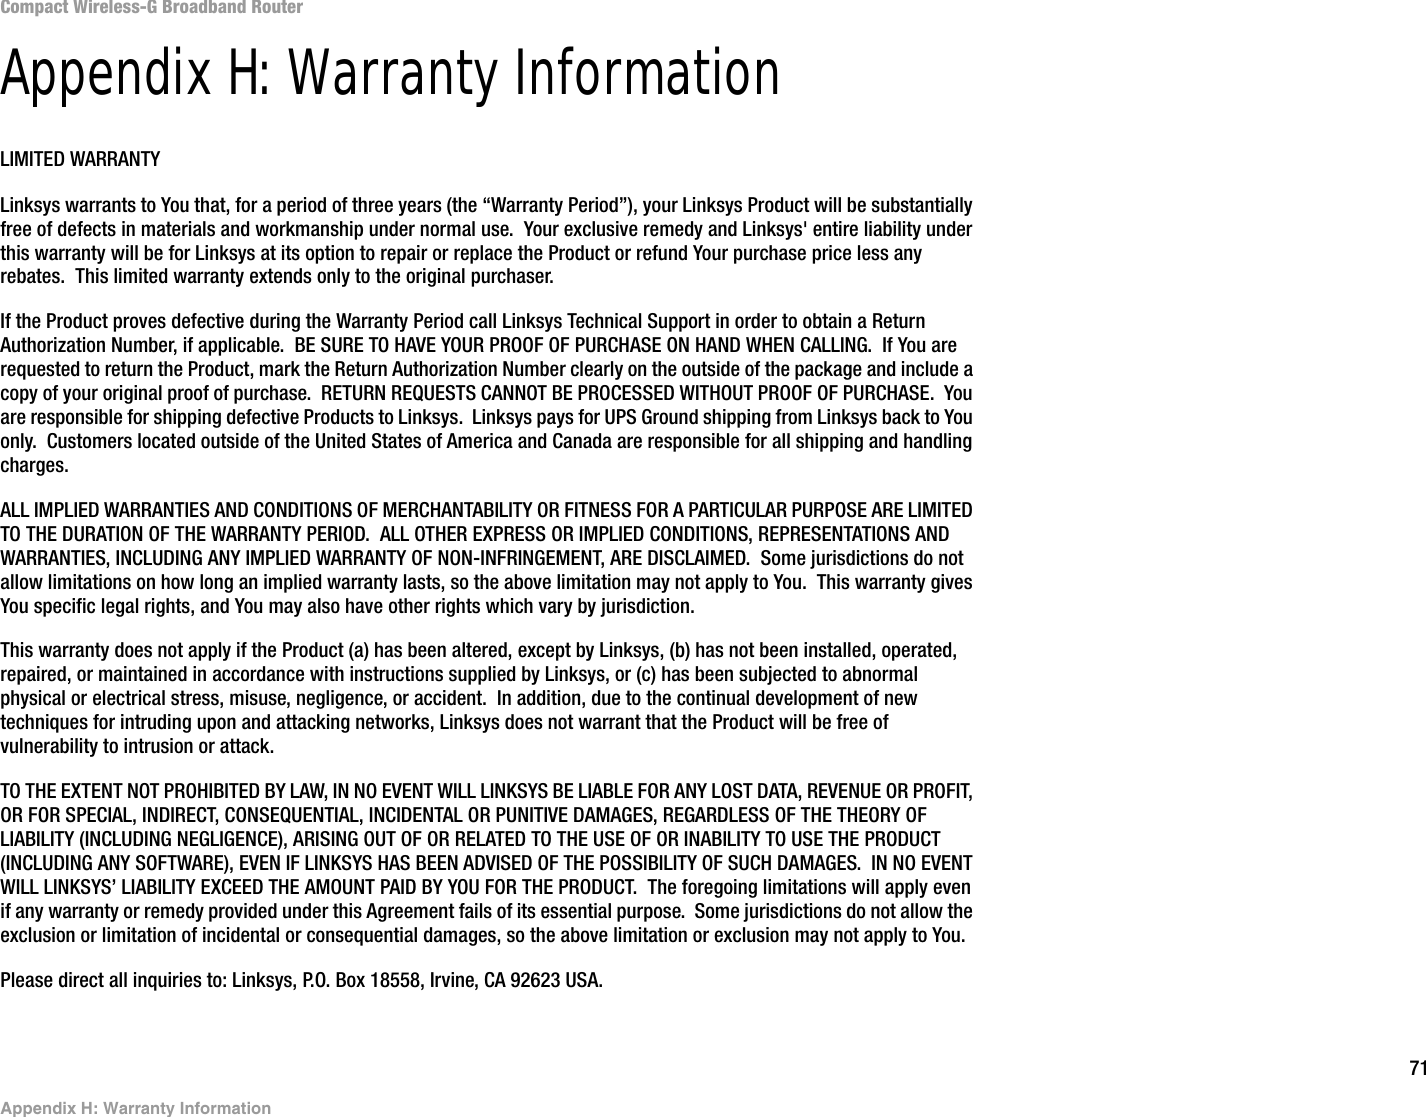 71Appendix H: Warranty InformationCompact Wireless-G Broadband RouterAppendix H: Warranty InformationLIMITED WARRANTYLinksys warrants to You that, for a period of three years (the “Warranty Period”), your Linksys Product will be substantially free of defects in materials and workmanship under normal use.  Your exclusive remedy and Linksys&apos; entire liability under this warranty will be for Linksys at its option to repair or replace the Product or refund Your purchase price less any rebates.  This limited warranty extends only to the original purchaser.  If the Product proves defective during the Warranty Period call Linksys Technical Support in order to obtain a Return Authorization Number, if applicable.  BE SURE TO HAVE YOUR PROOF OF PURCHASE ON HAND WHEN CALLING.  If You are requested to return the Product, mark the Return Authorization Number clearly on the outside of the package and include a copy of your original proof of purchase.  RETURN REQUESTS CANNOT BE PROCESSED WITHOUT PROOF OF PURCHASE.  You are responsible for shipping defective Products to Linksys.  Linksys pays for UPS Ground shipping from Linksys back to You only.  Customers located outside of the United States of America and Canada are responsible for all shipping and handling charges. ALL IMPLIED WARRANTIES AND CONDITIONS OF MERCHANTABILITY OR FITNESS FOR A PARTICULAR PURPOSE ARE LIMITED TO THE DURATION OF THE WARRANTY PERIOD.  ALL OTHER EXPRESS OR IMPLIED CONDITIONS, REPRESENTATIONS AND WARRANTIES, INCLUDING ANY IMPLIED WARRANTY OF NON-INFRINGEMENT, ARE DISCLAIMED.  Some jurisdictions do not allow limitations on how long an implied warranty lasts, so the above limitation may not apply to You.  This warranty gives You specific legal rights, and You may also have other rights which vary by jurisdiction.This warranty does not apply if the Product (a) has been altered, except by Linksys, (b) has not been installed, operated, repaired, or maintained in accordance with instructions supplied by Linksys, or (c) has been subjected to abnormal physical or electrical stress, misuse, negligence, or accident.  In addition, due to the continual development of new techniques for intruding upon and attacking networks, Linksys does not warrant that the Product will be free of vulnerability to intrusion or attack.TO THE EXTENT NOT PROHIBITED BY LAW, IN NO EVENT WILL LINKSYS BE LIABLE FOR ANY LOST DATA, REVENUE OR PROFIT, OR FOR SPECIAL, INDIRECT, CONSEQUENTIAL, INCIDENTAL OR PUNITIVE DAMAGES, REGARDLESS OF THE THEORY OF LIABILITY (INCLUDING NEGLIGENCE), ARISING OUT OF OR RELATED TO THE USE OF OR INABILITY TO USE THE PRODUCT (INCLUDING ANY SOFTWARE), EVEN IF LINKSYS HAS BEEN ADVISED OF THE POSSIBILITY OF SUCH DAMAGES.  IN NO EVENT WILL LINKSYS’ LIABILITY EXCEED THE AMOUNT PAID BY YOU FOR THE PRODUCT.  The foregoing limitations will apply even if any warranty or remedy provided under this Agreement fails of its essential purpose.  Some jurisdictions do not allow the exclusion or limitation of incidental or consequential damages, so the above limitation or exclusion may not apply to You.Please direct all inquiries to: Linksys, P.O. Box 18558, Irvine, CA 92623 USA.